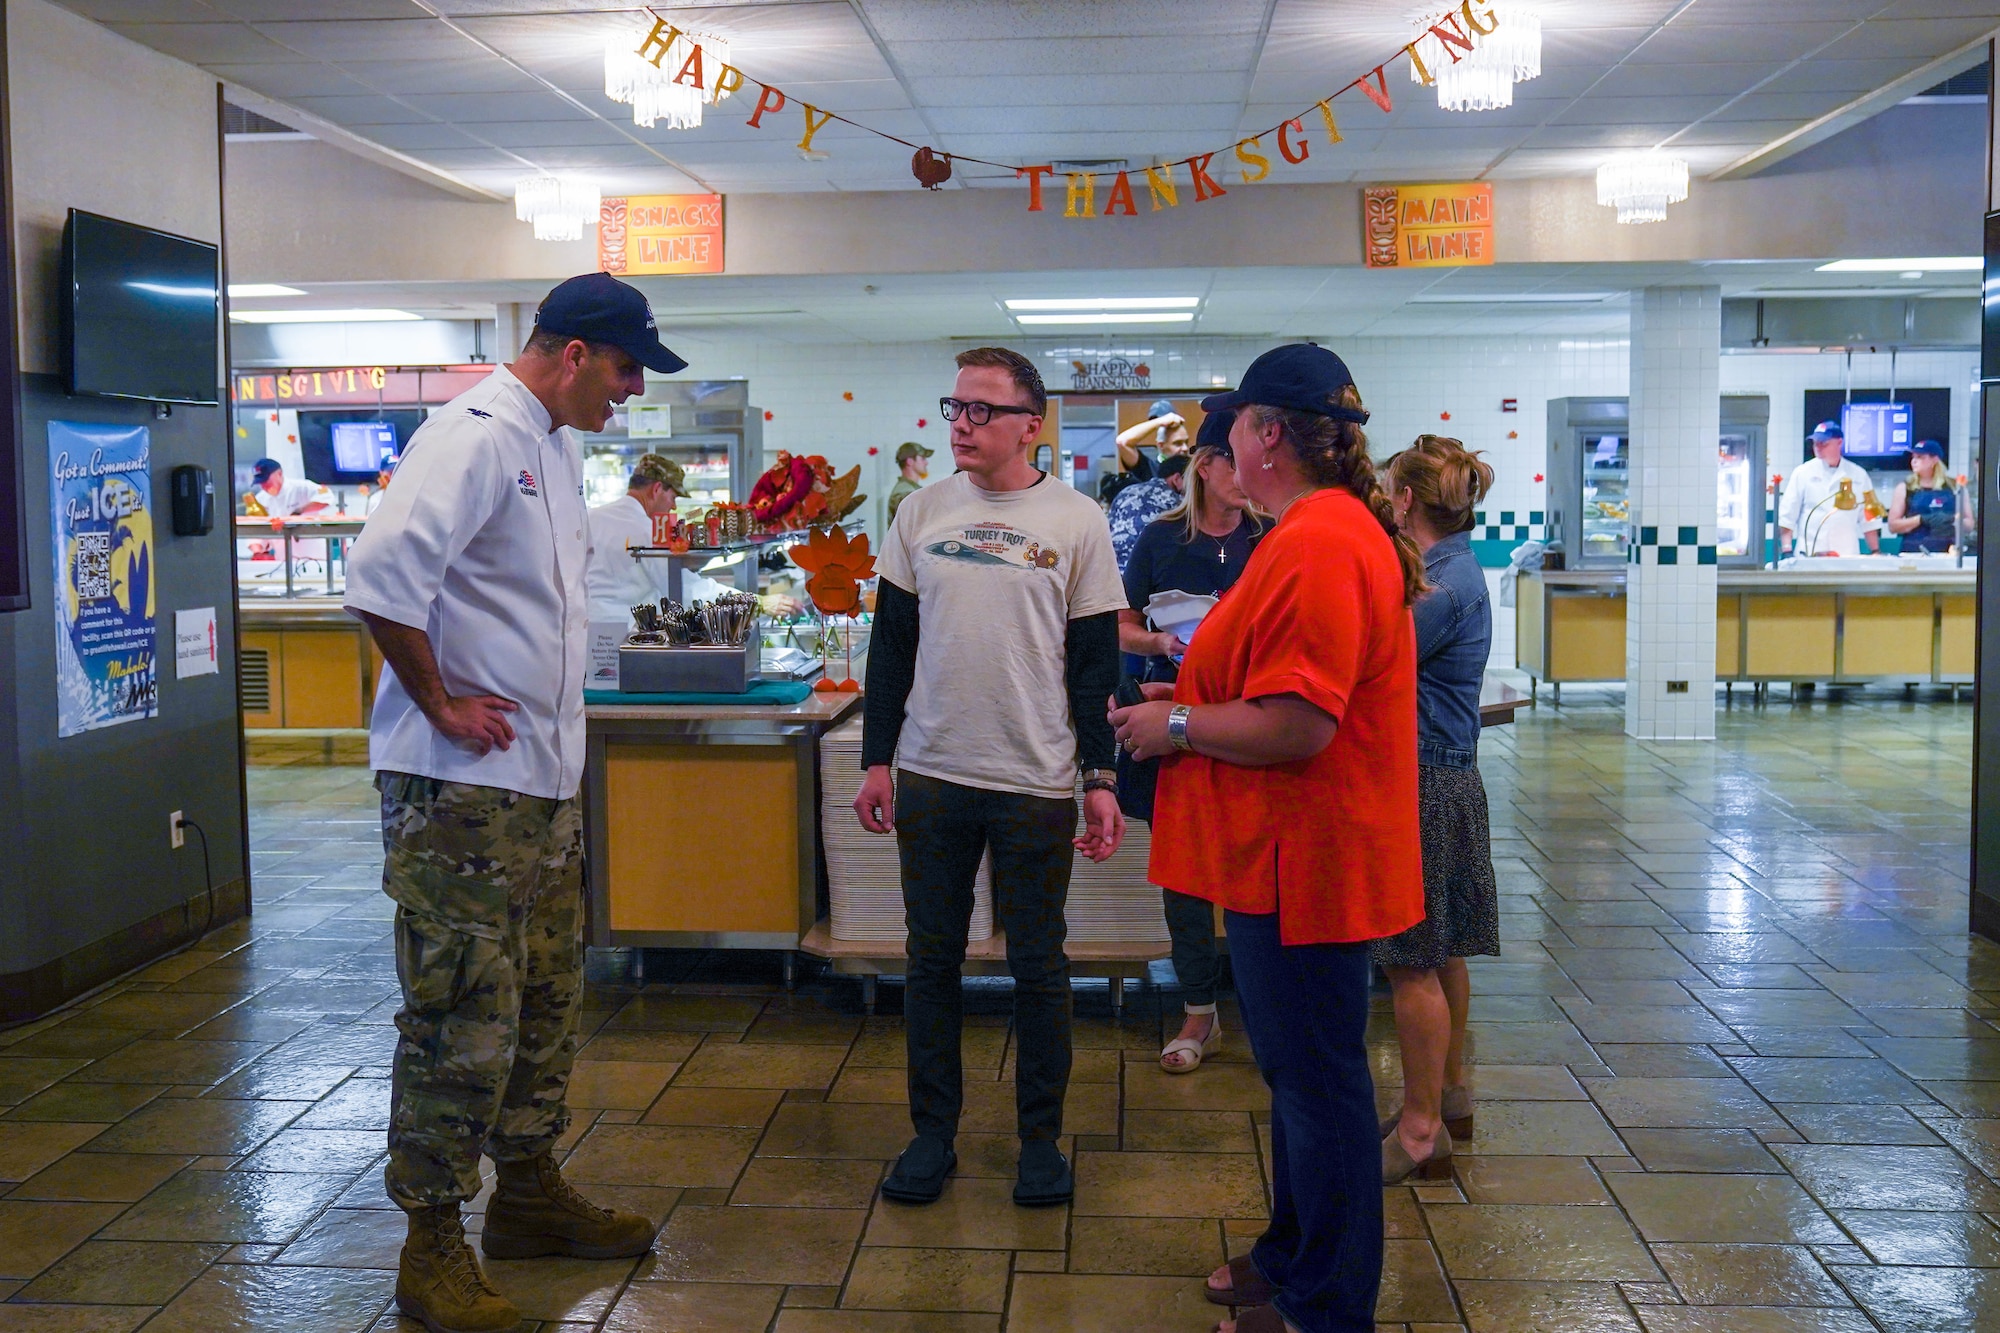 Col. Daniel Dobbels, 15th Wing commander and his wife, Lisa Dobbels greet airmen on Thanksgiving at the Hale Aina Dining Facility, November 25, 2021. Leaders from Joint Base Pearl Harbor-Hickam served airmen and their families lunch on Thanksgiving. (U.S. Air Force photo by Airman 1st Class Makensie Cooper)